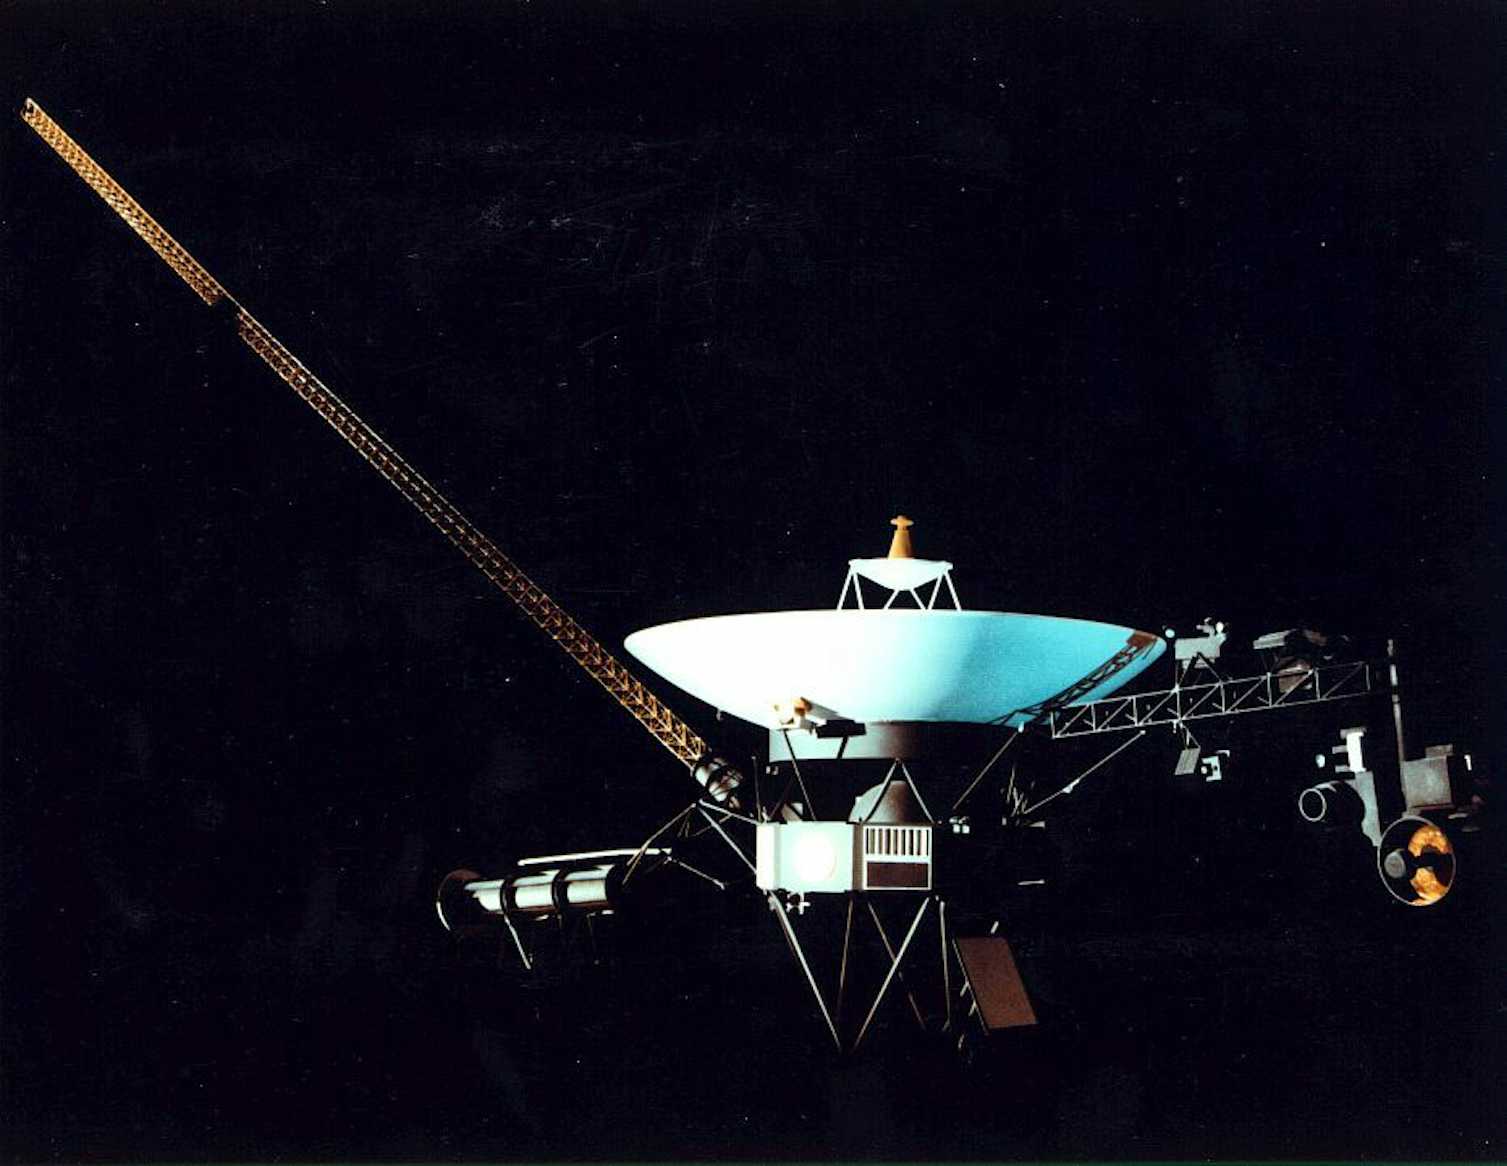 voyager and voyager 2